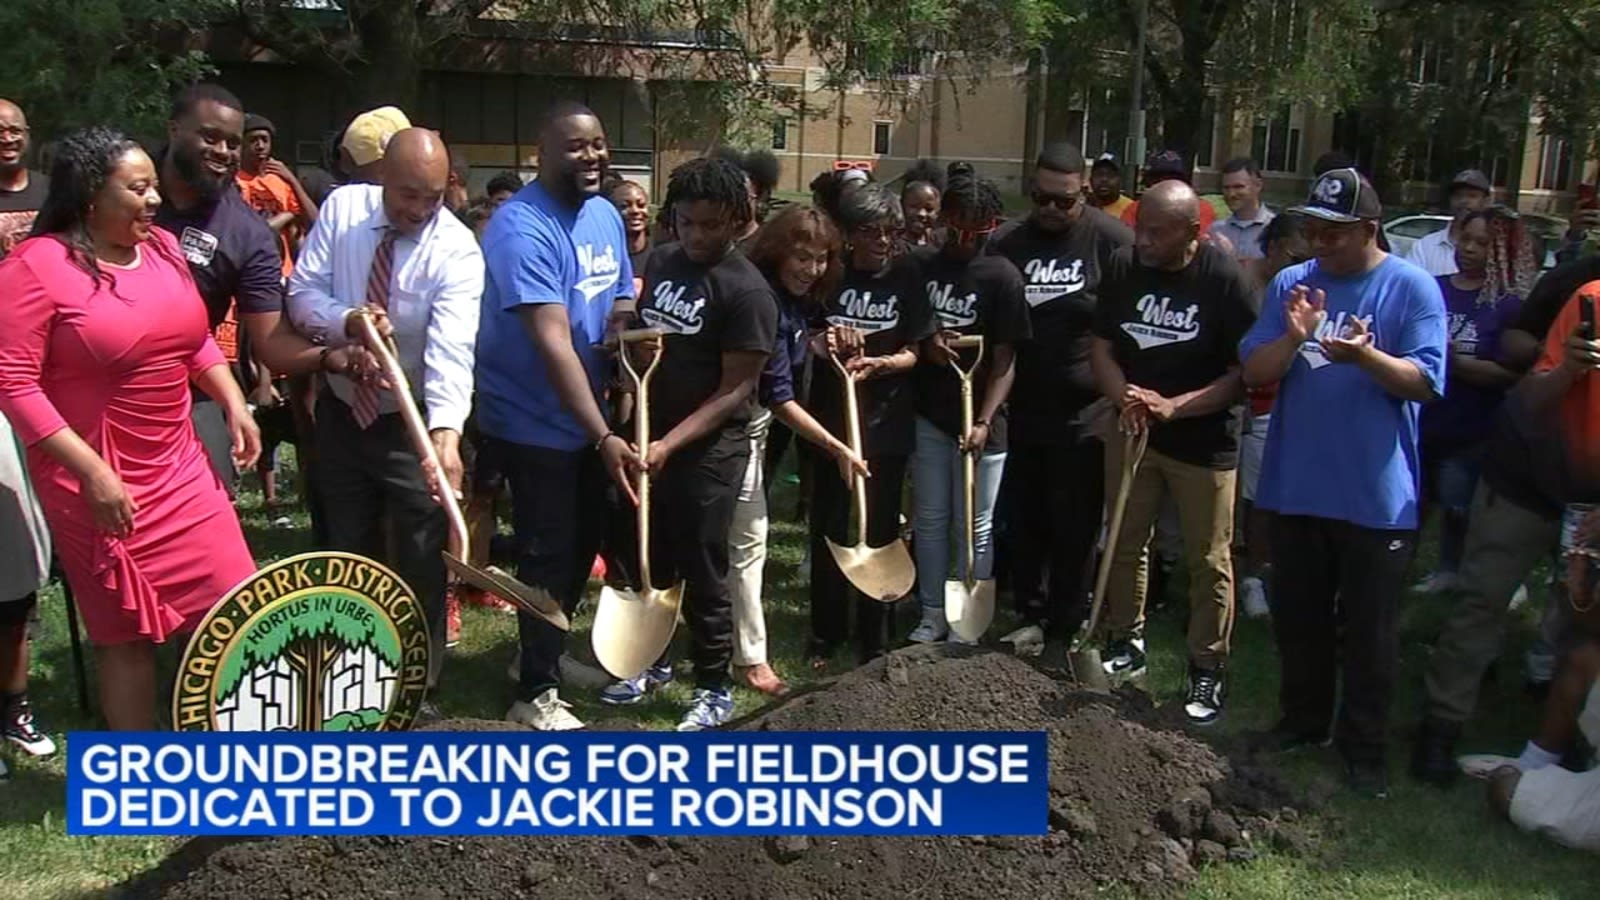 Groundbreaking ceremony held for Jackie Robinson Fieldhouse in Washington Heights